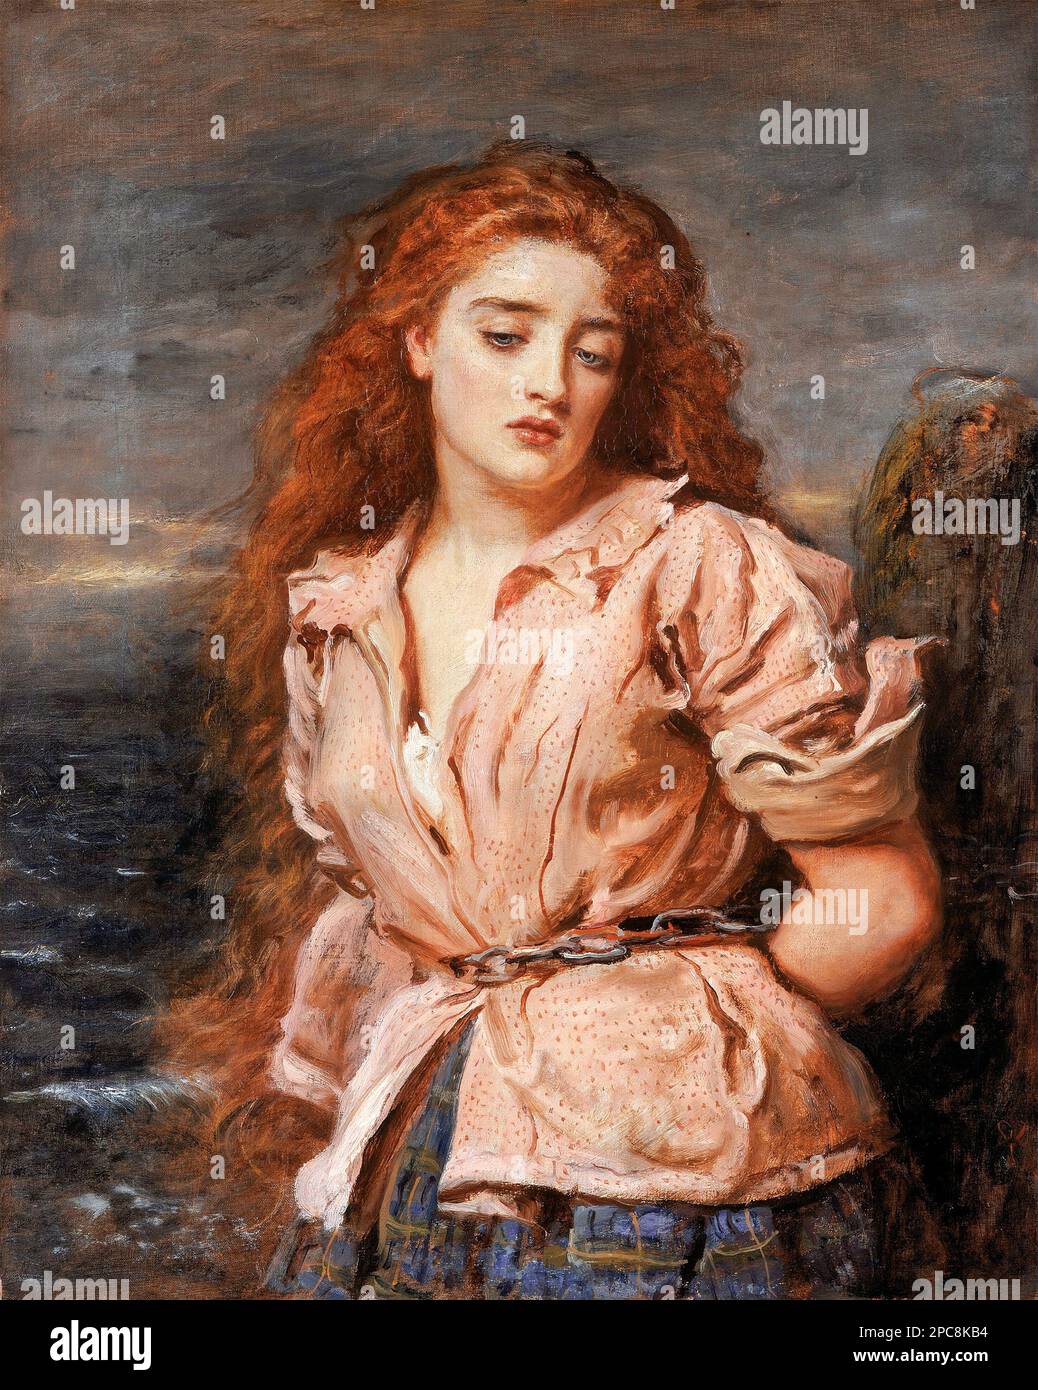 The Martyr of the Solway by John Everett Millais (1829-1896), oil on canvas, c. 1871 Stock Photo